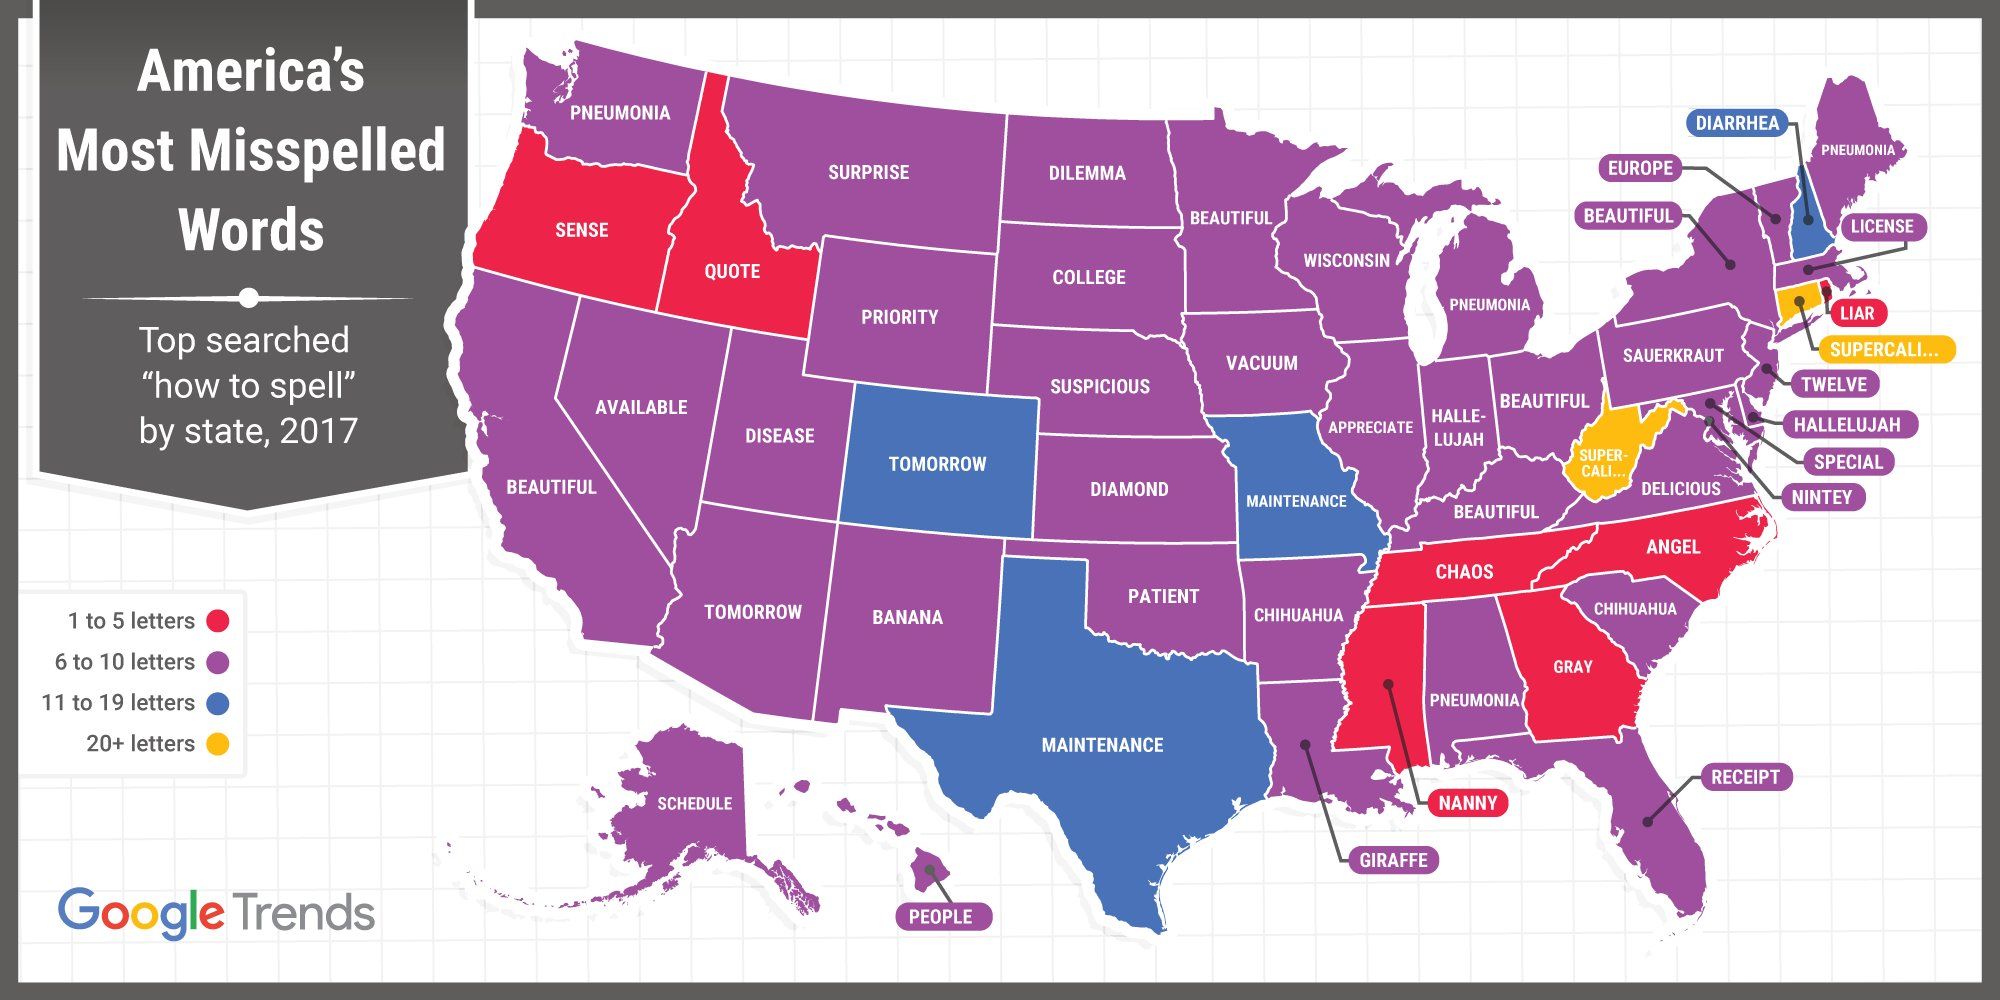 According to Google, the most misspelled word in Wisconsin is Wisconsin.